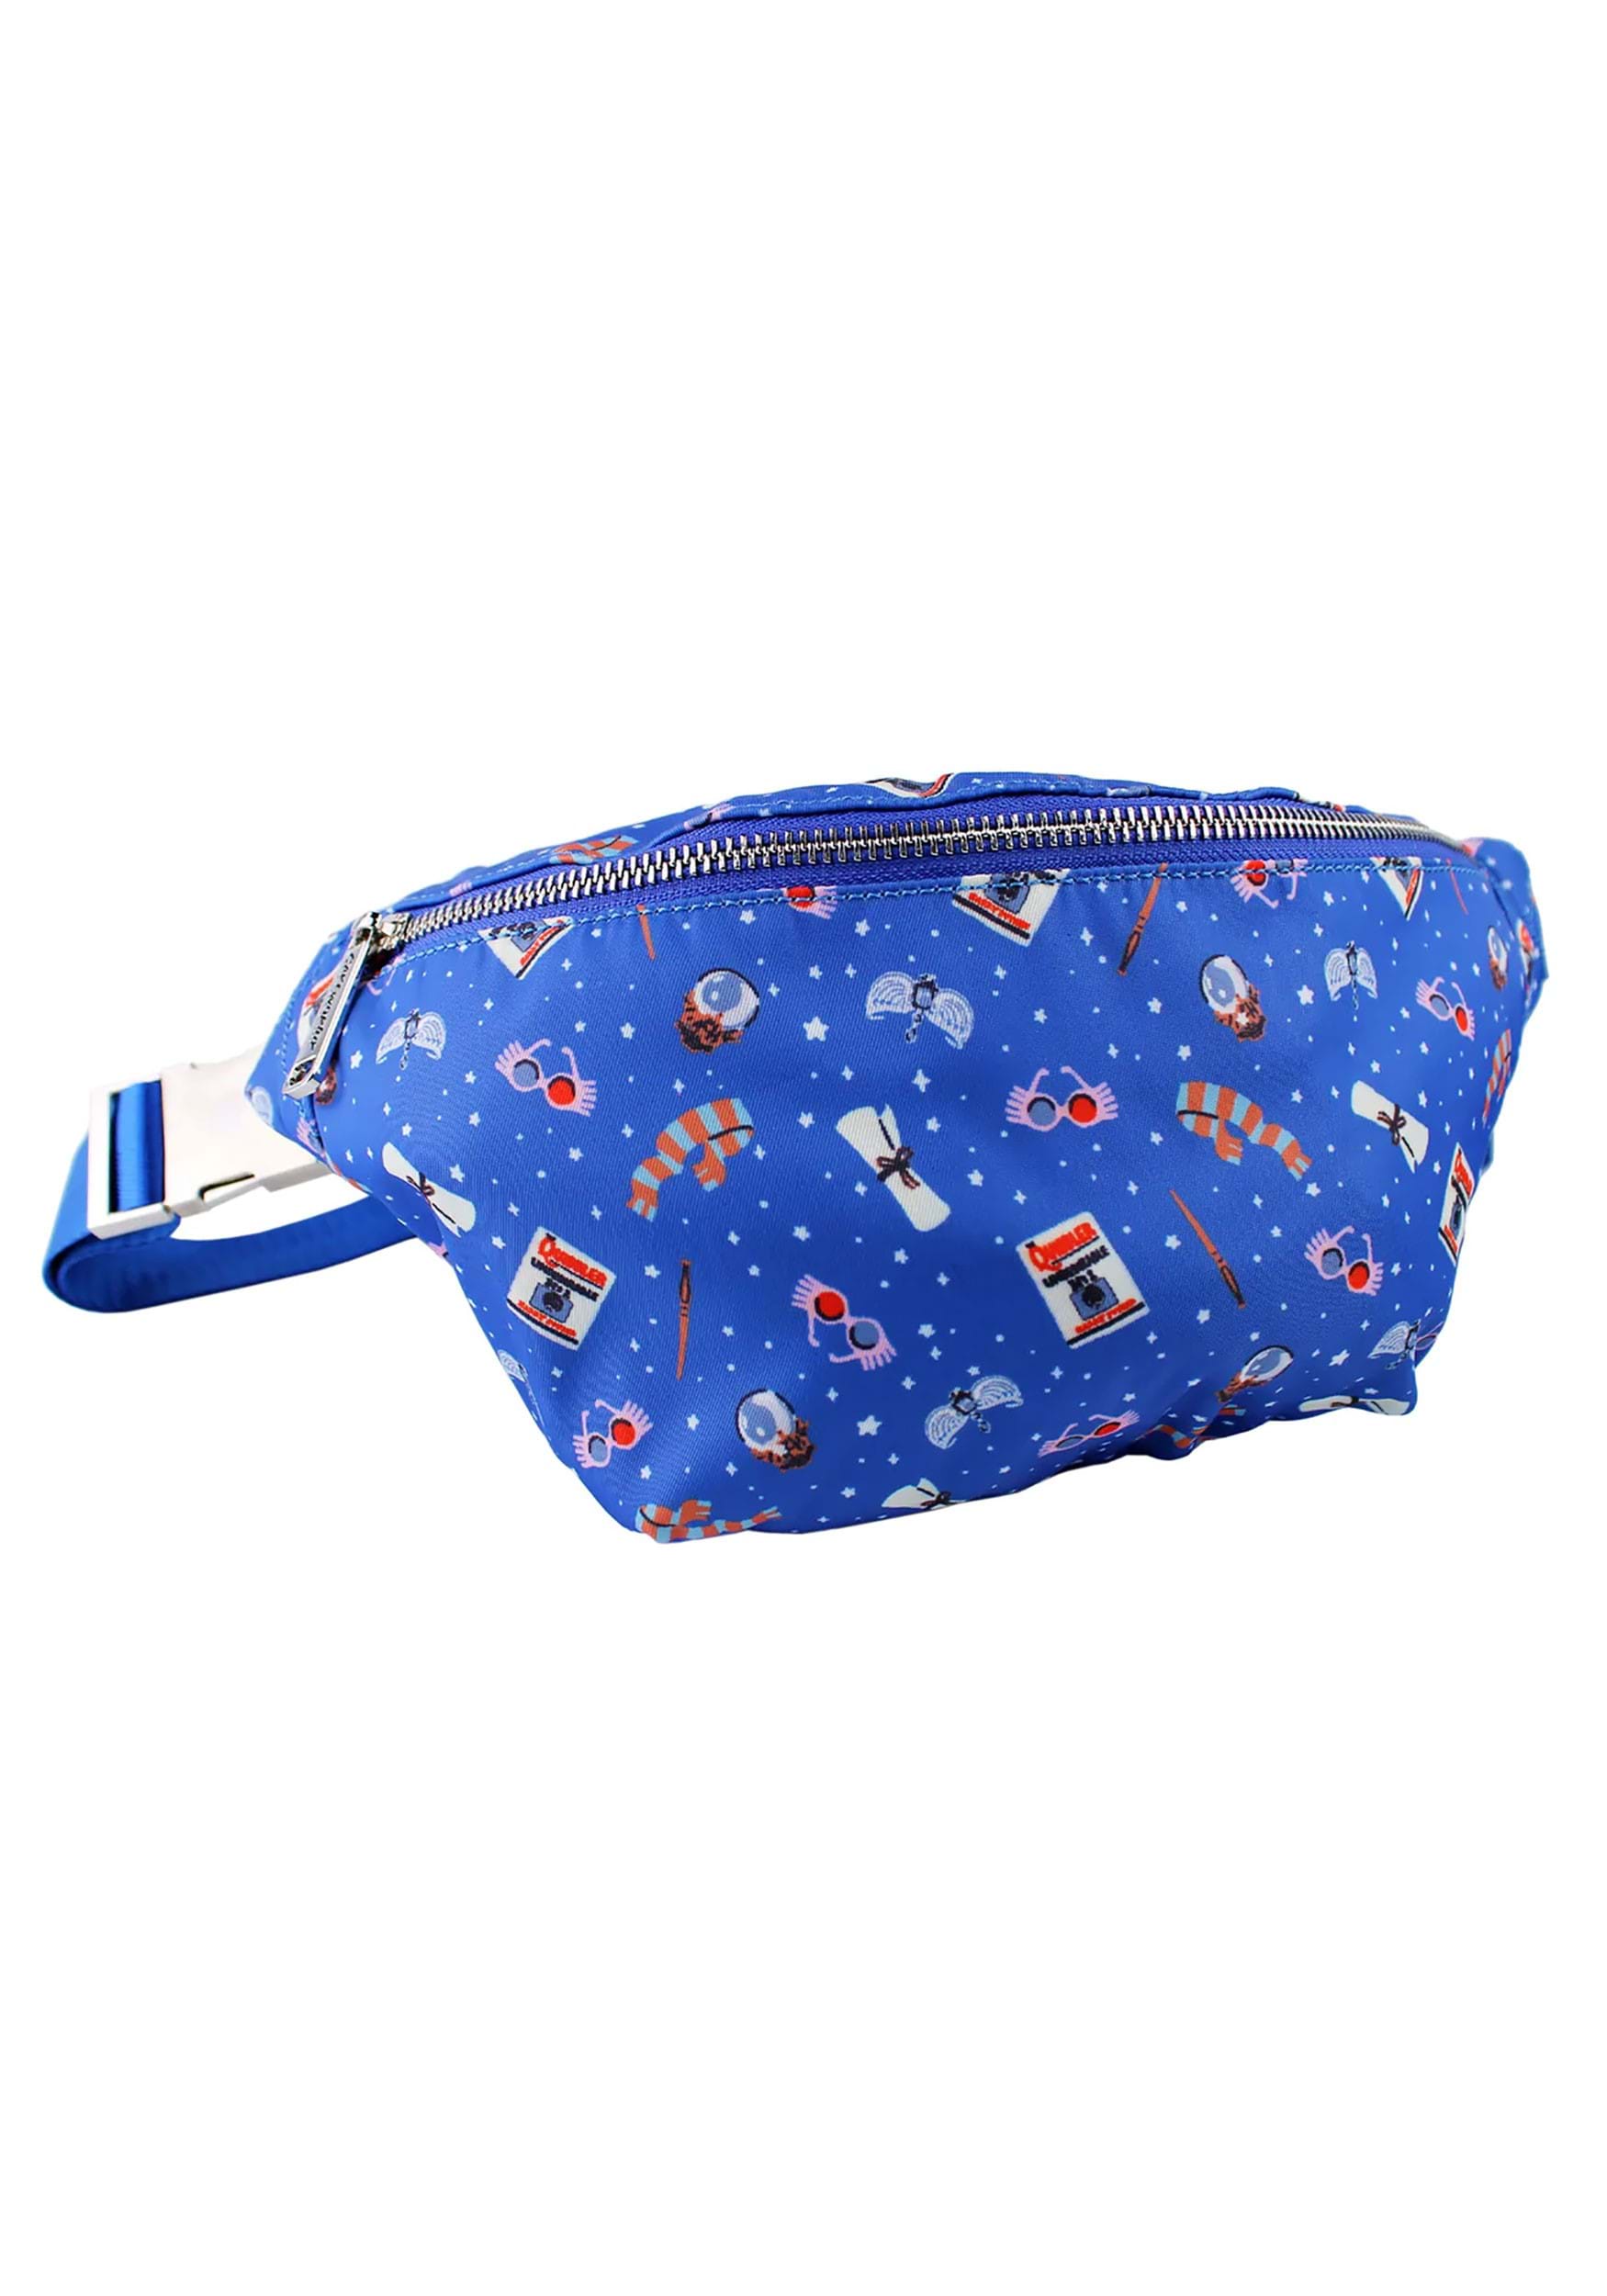 Cakeworthy Harry Potter Ravenclaw Fanny Pack